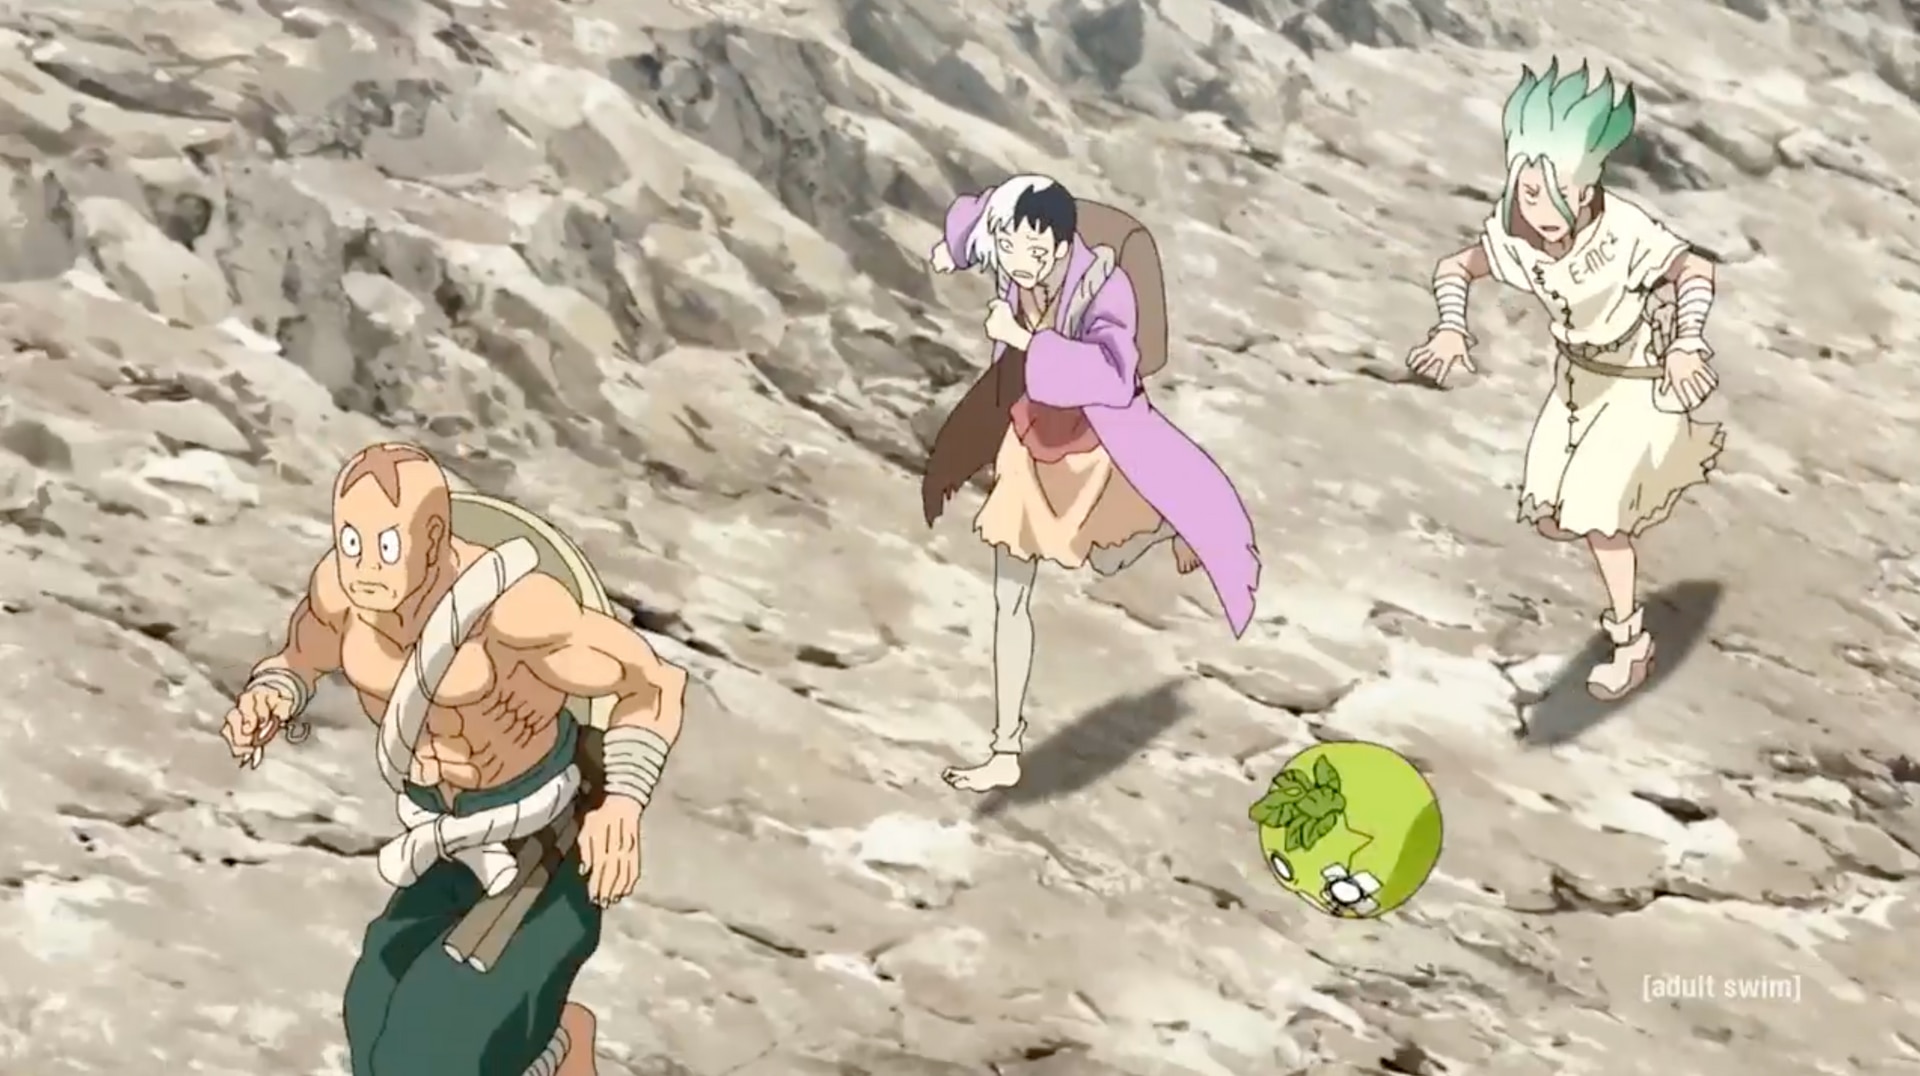 Dr. Stone 3 Episode 1 - Return to the Kingdom of Science - I drink